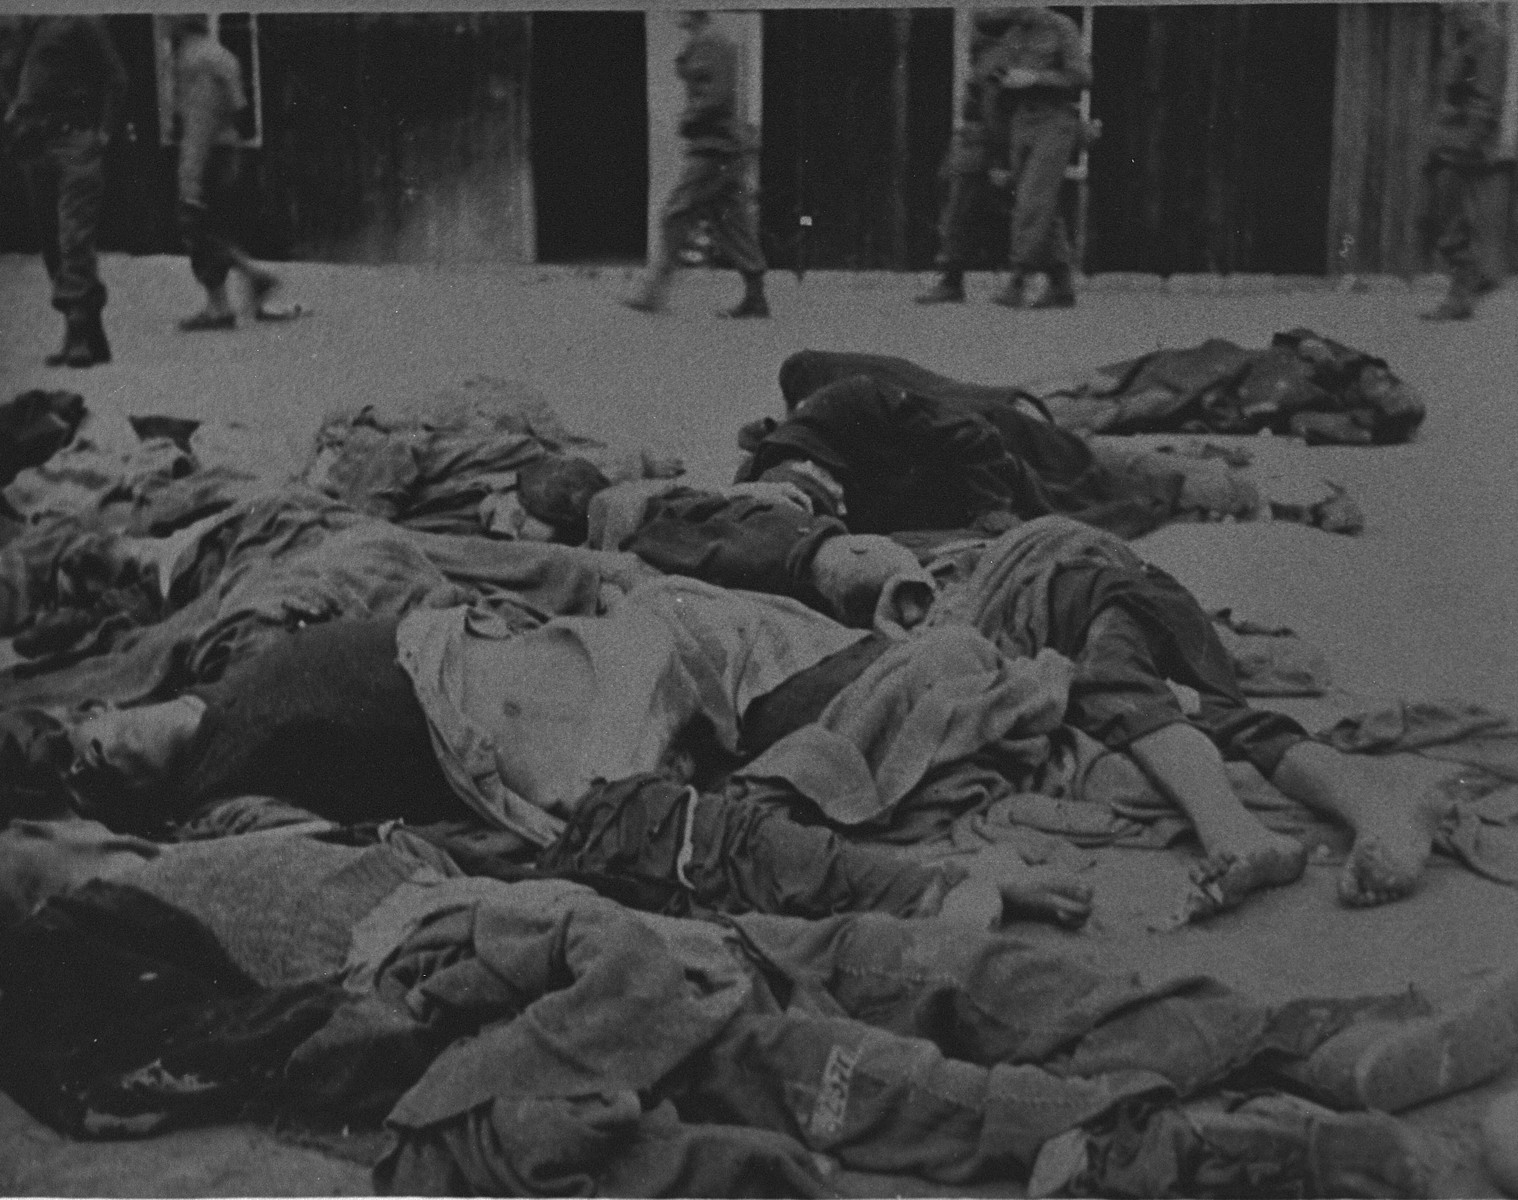 American soldiers in the background walk past corpses in Ohrdruf.